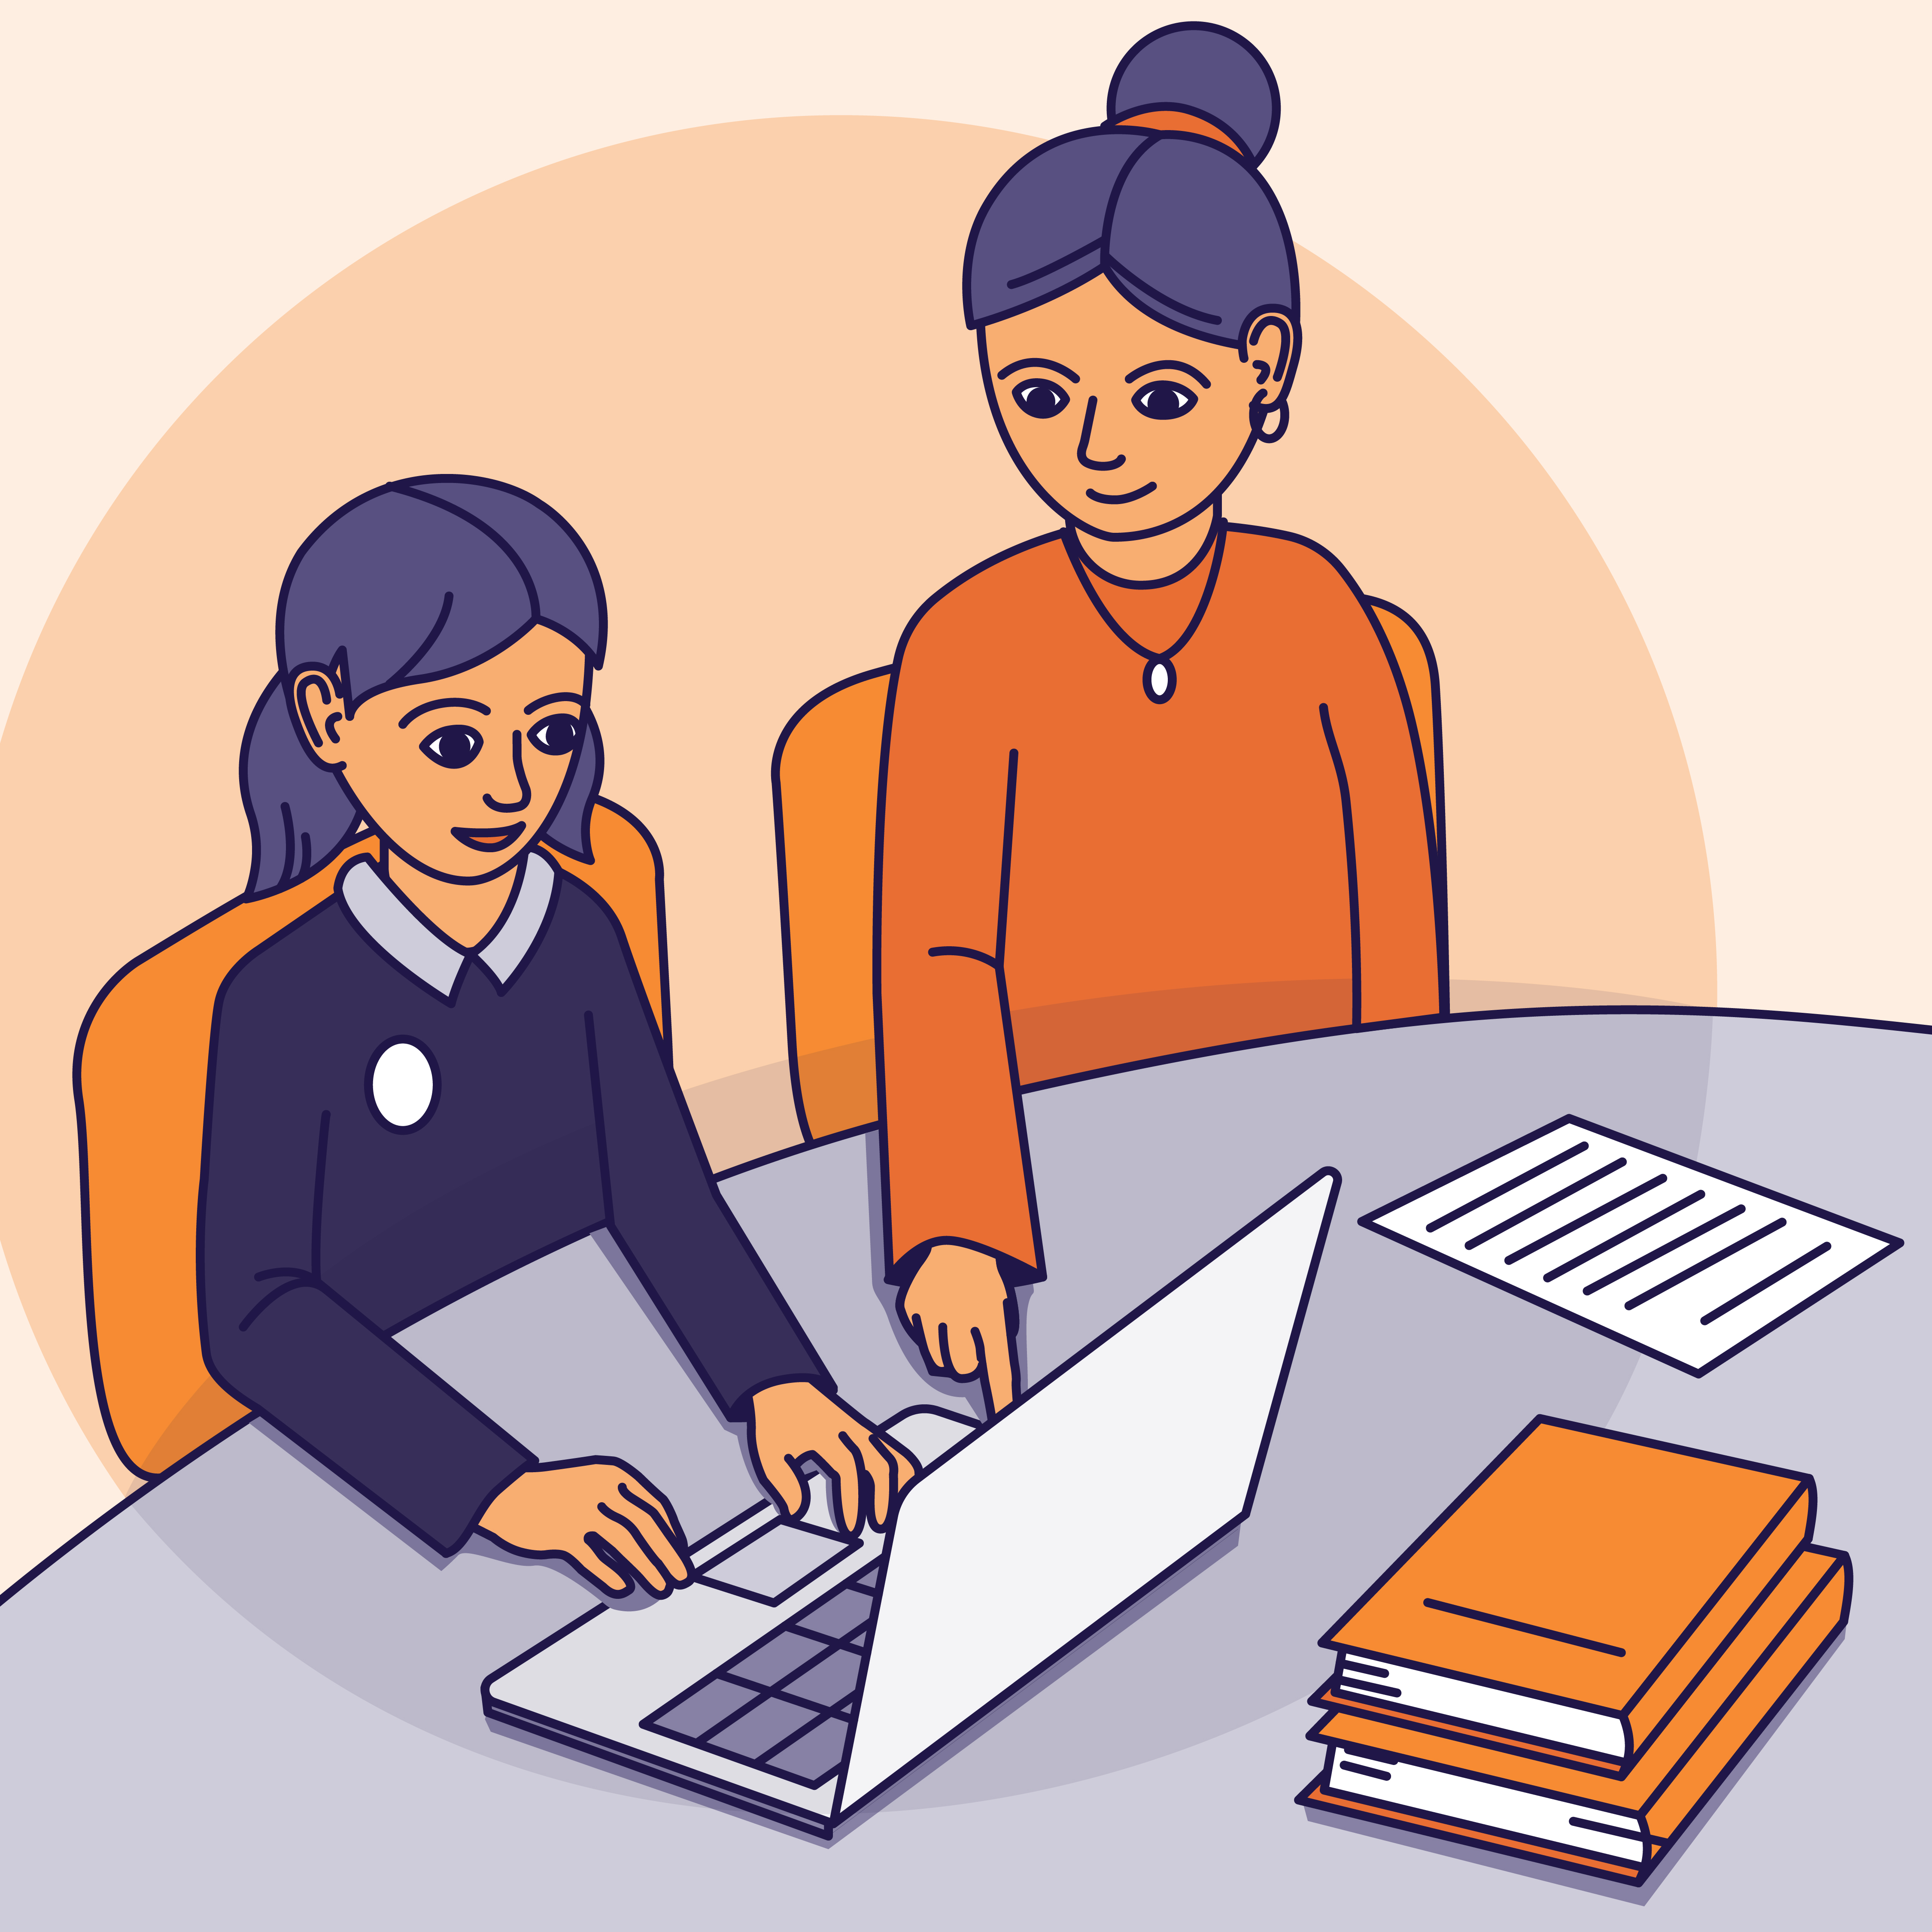 An illustration of 2 people sitting at a desk. One is a child and one is an adult. The adult is helping the child with the work on their laptop.